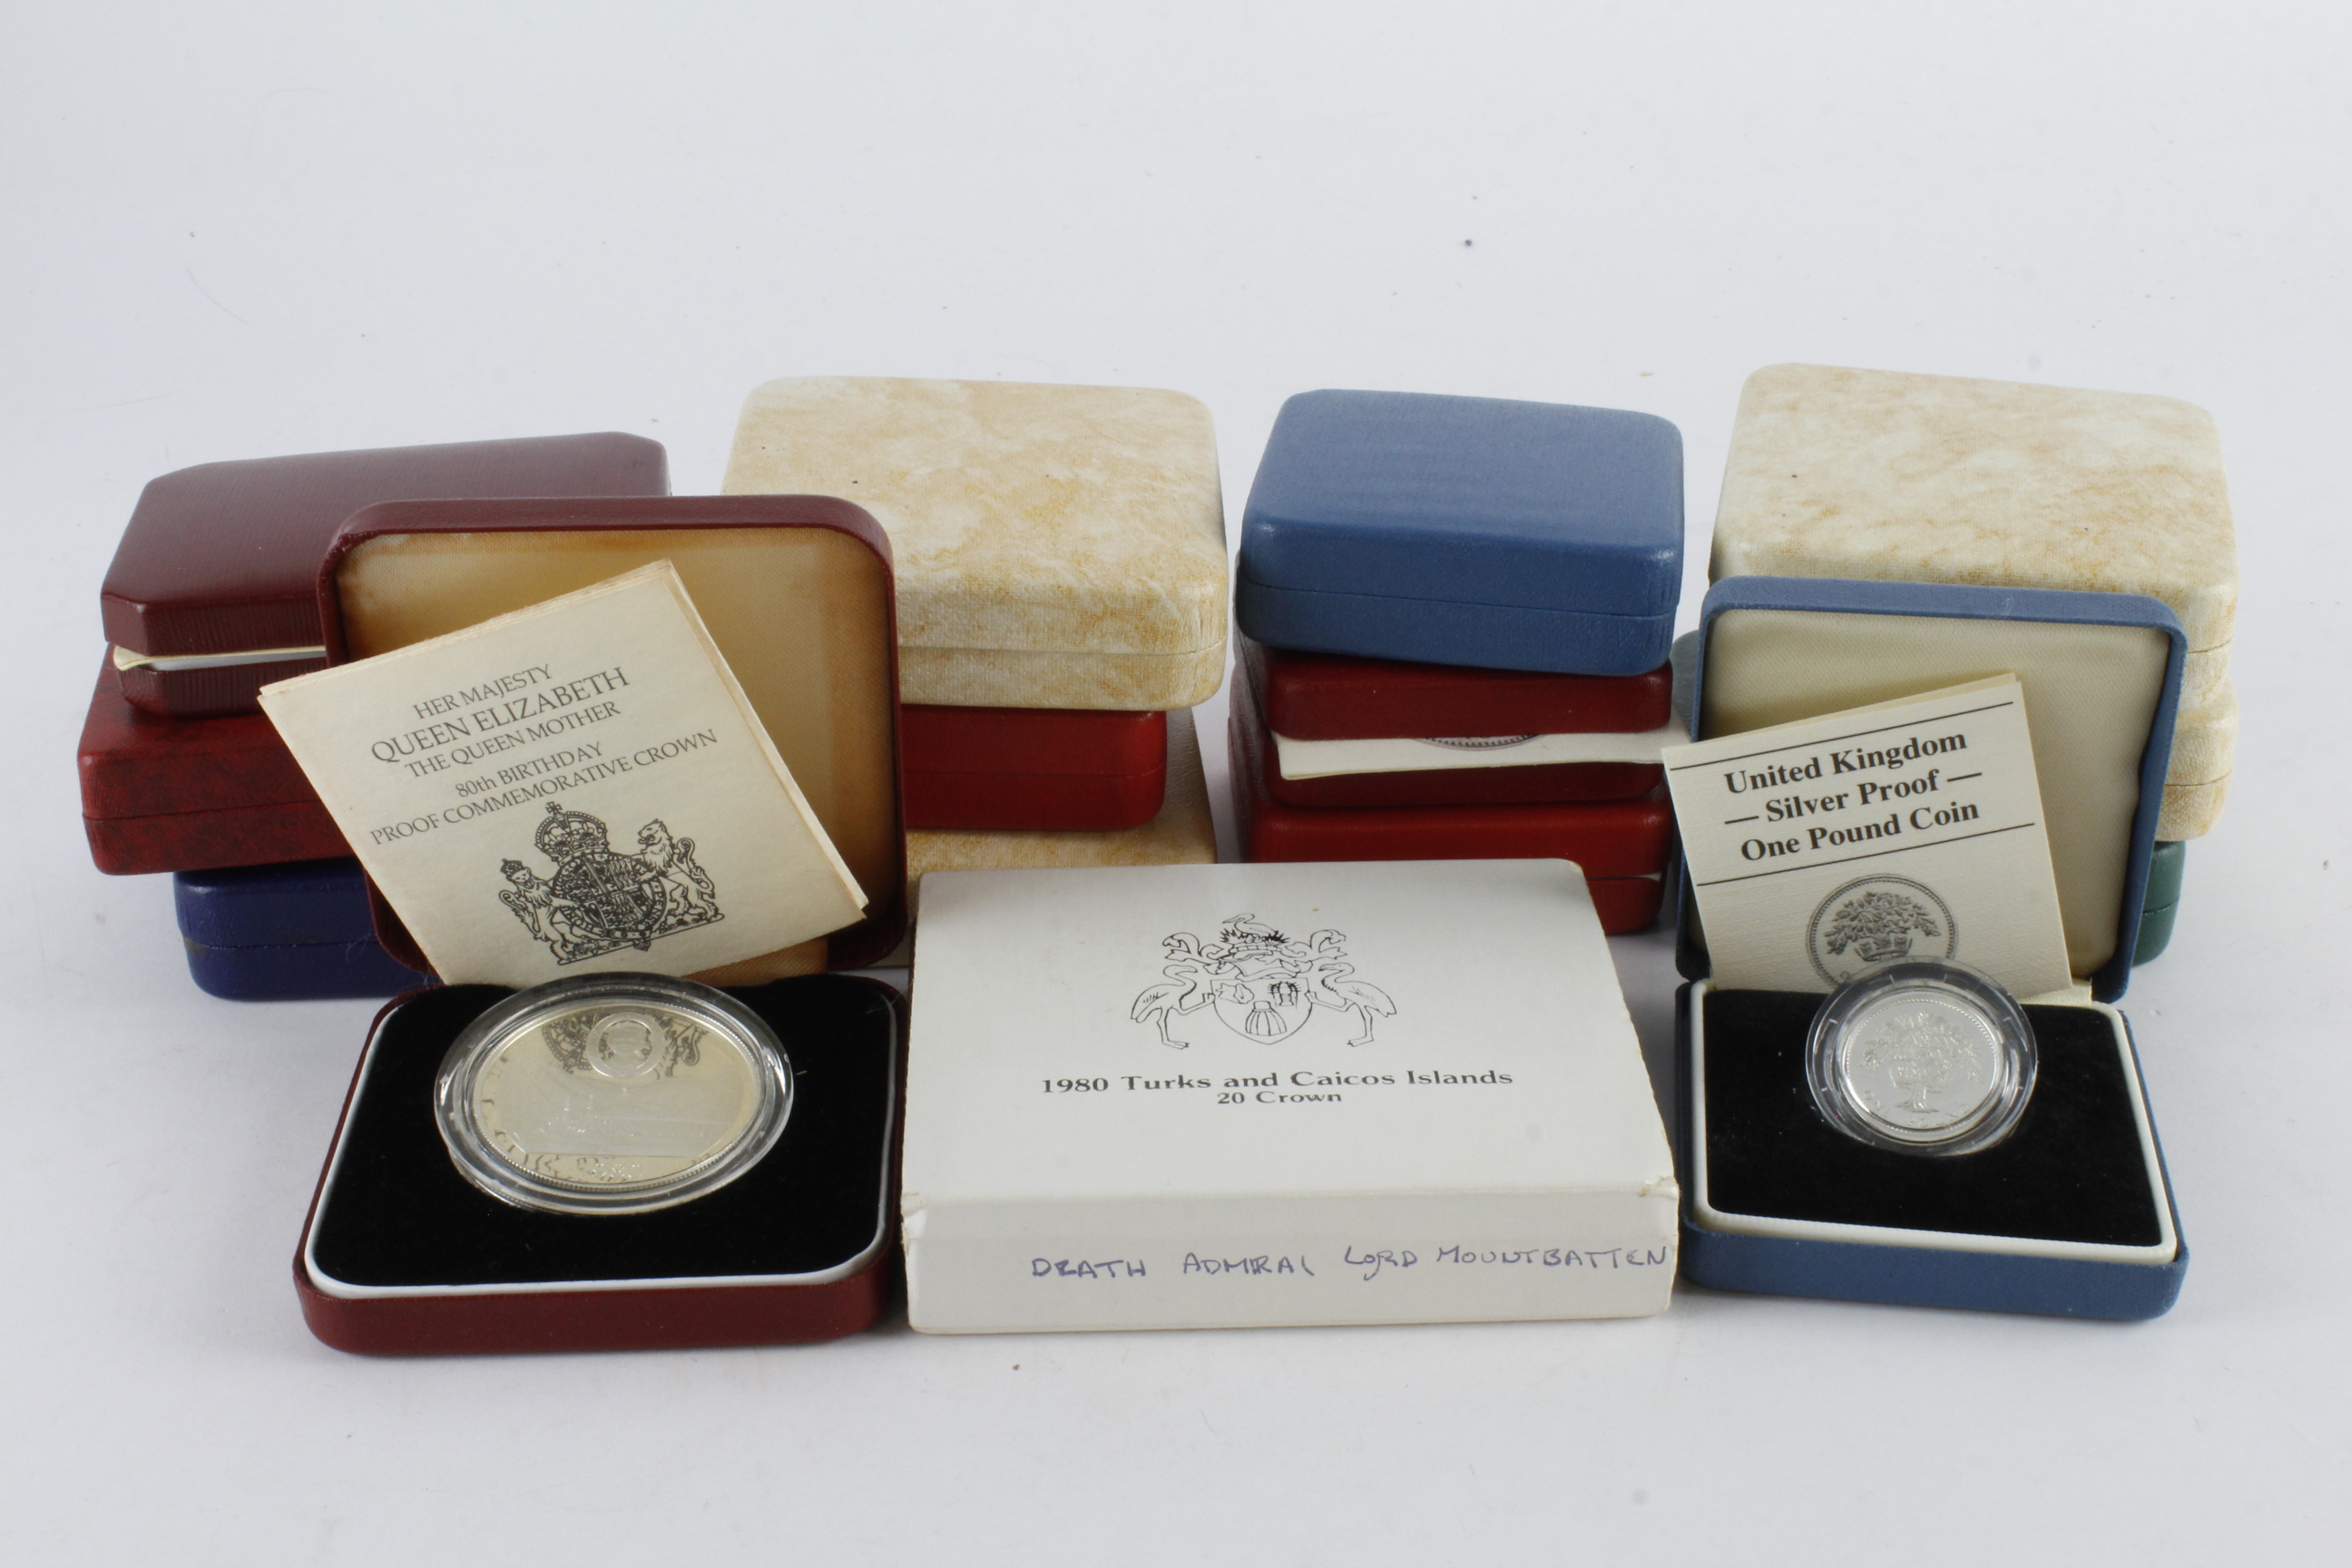 GB & World Silver Proofs (15) cased with certs.